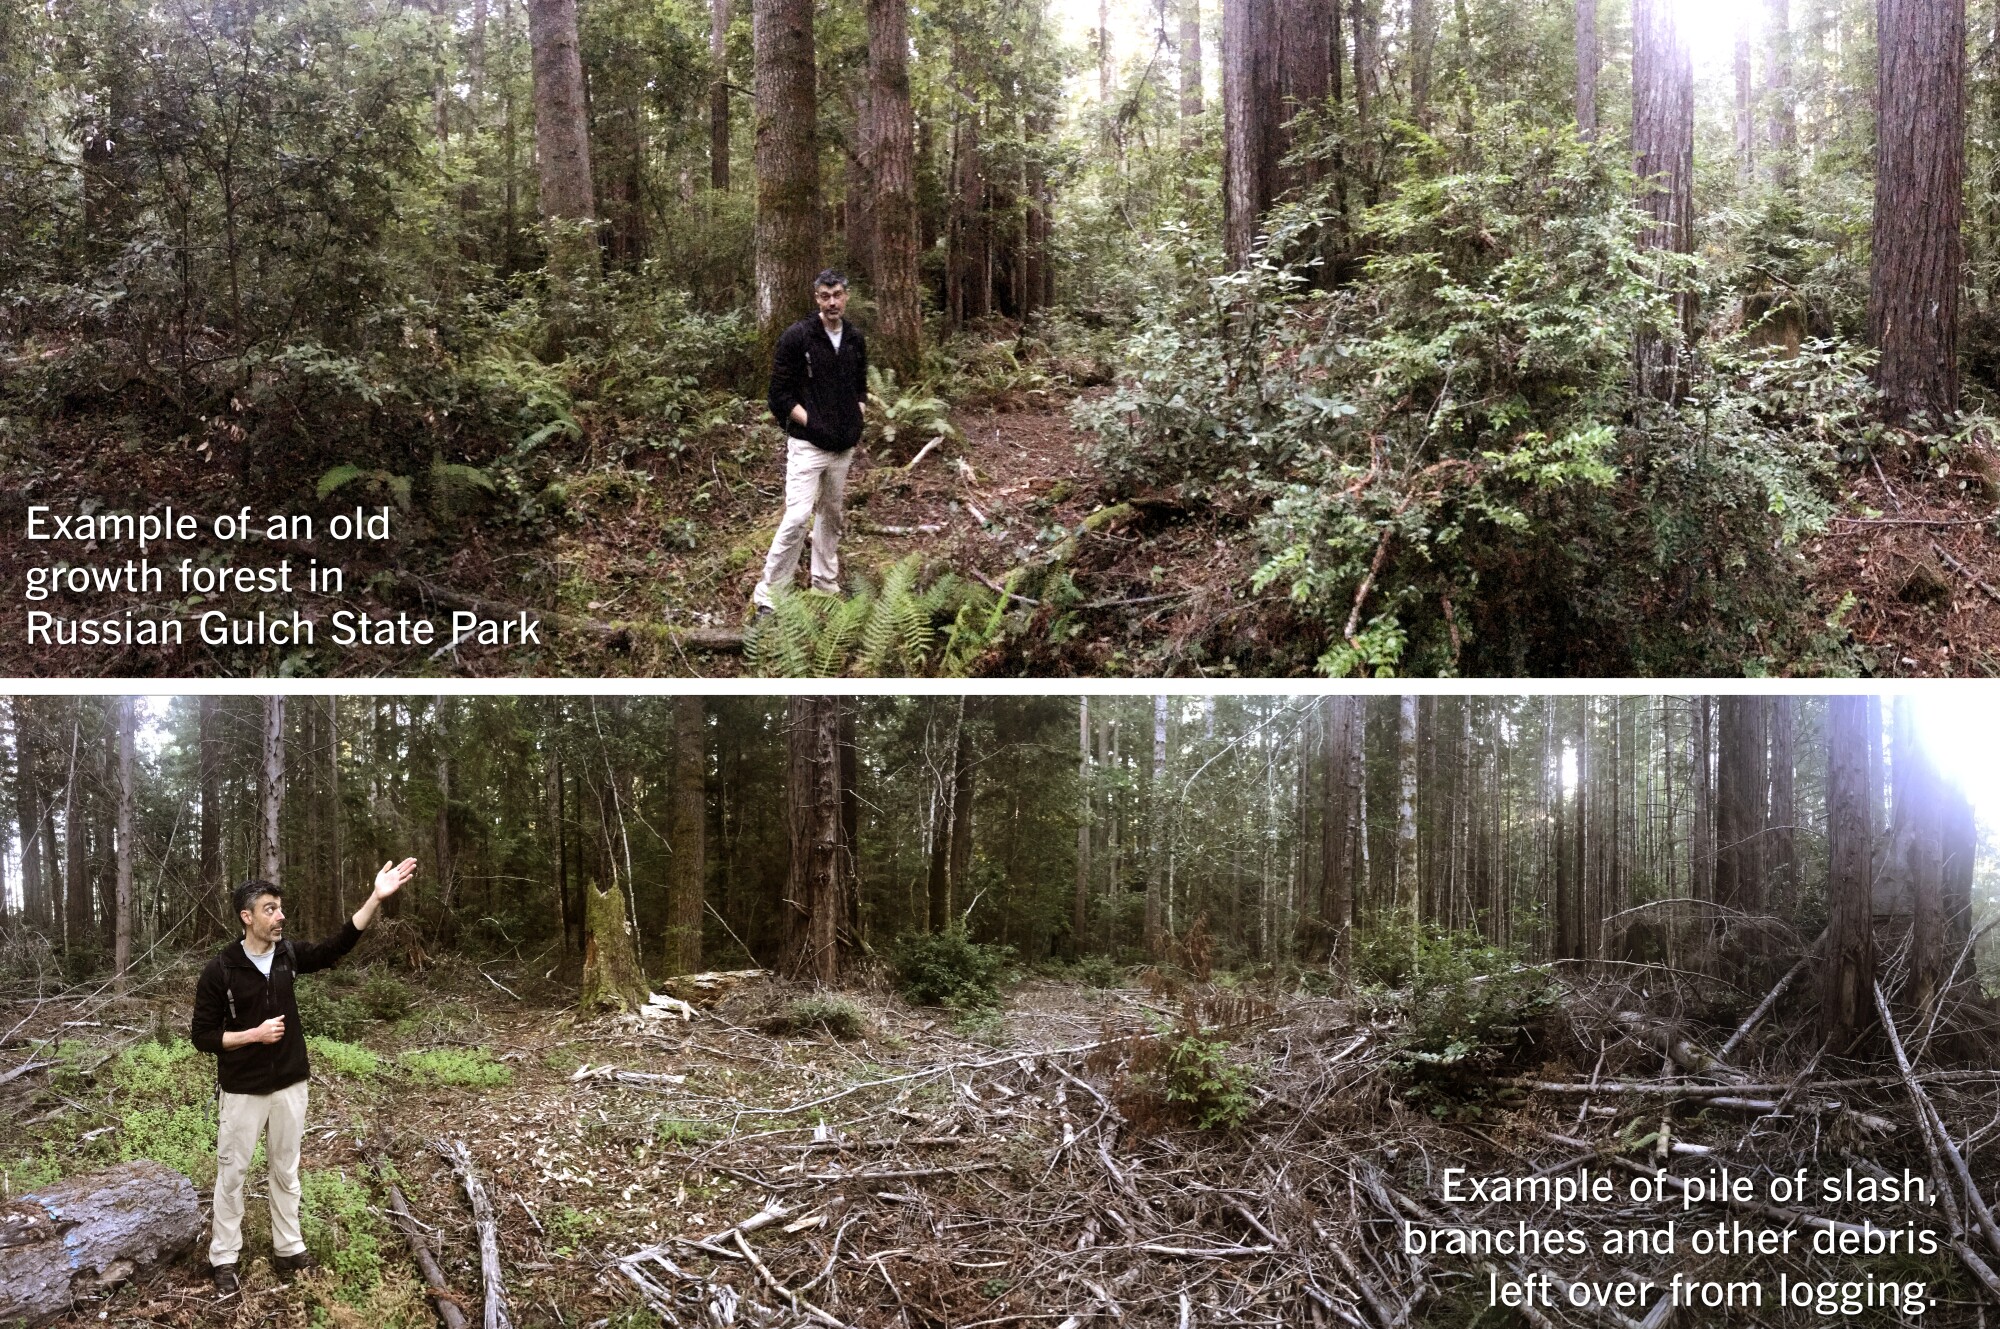 J.P. O'Brien standing in old growth forest in Russian Gulch State Park and a 'slash' pile in Jackson Demonstration State Park